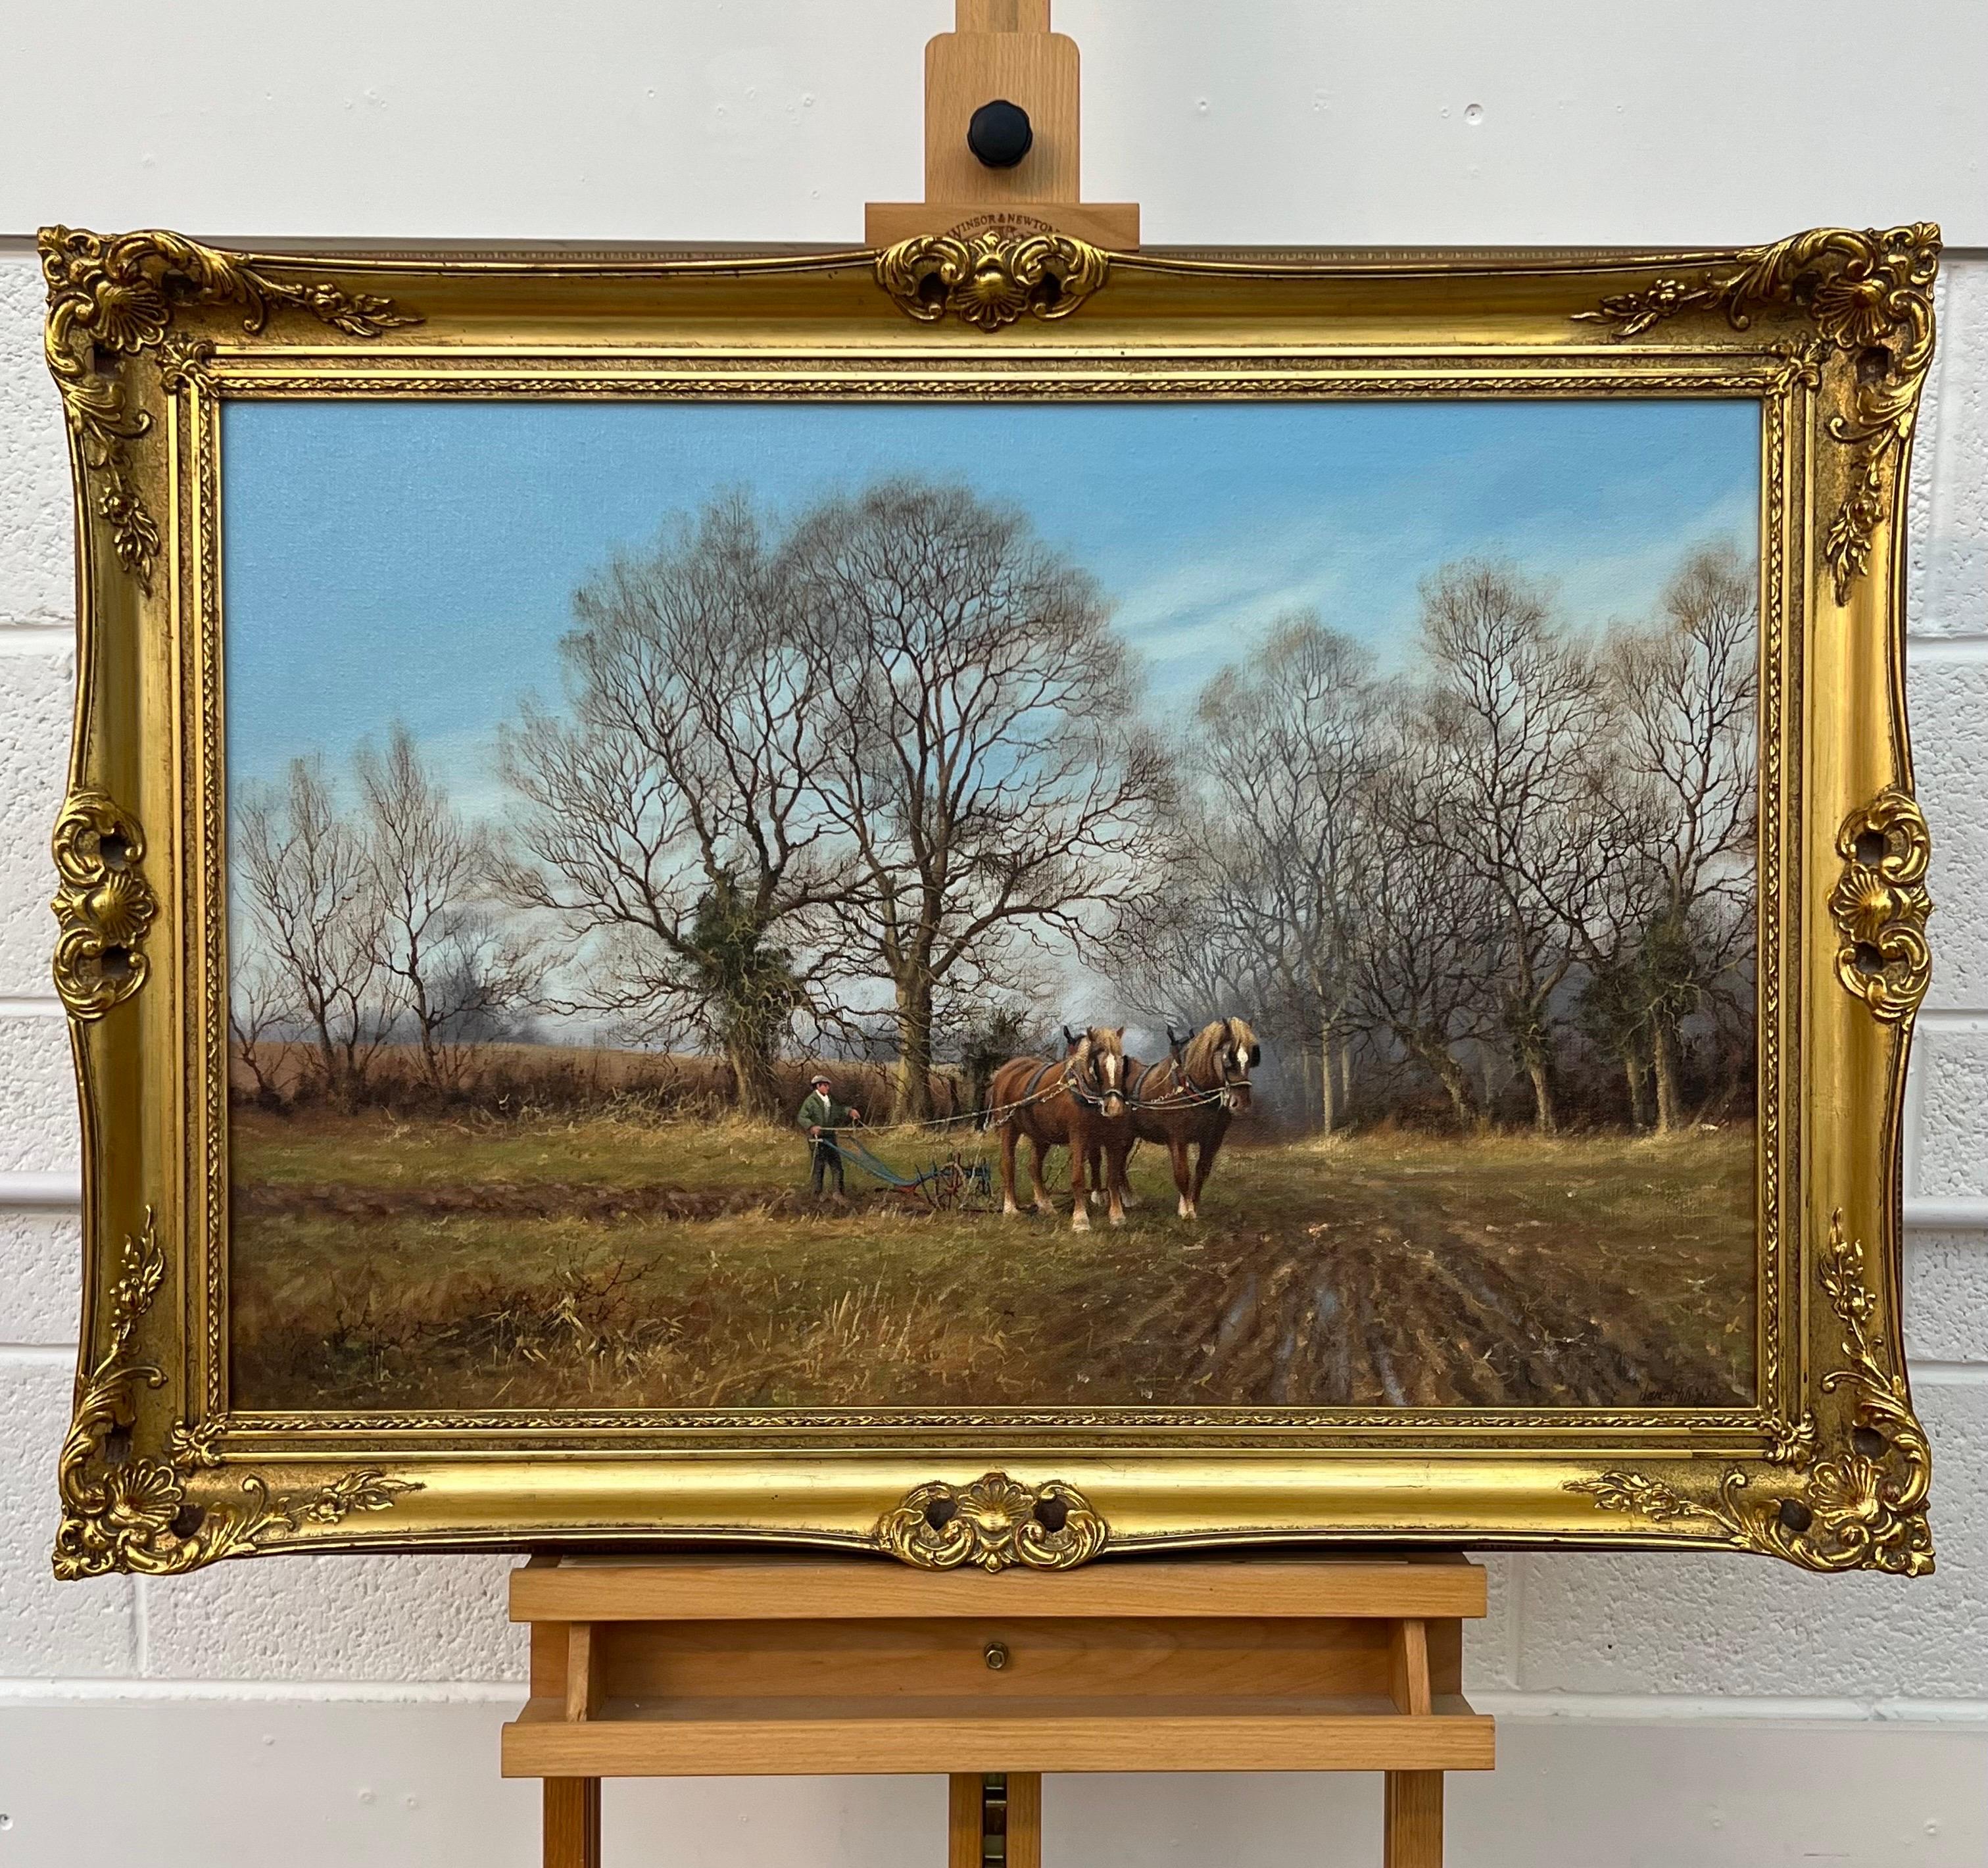 Traditional Oil Painting of the English Countryside surrounded by Trees with Horses Pulling Plough by Vintage British Artist, James Wright 

Art measures 30 x 20 inches
Frame measures 36 x 26 inches 

James Wright was born in Peterborough in 1935